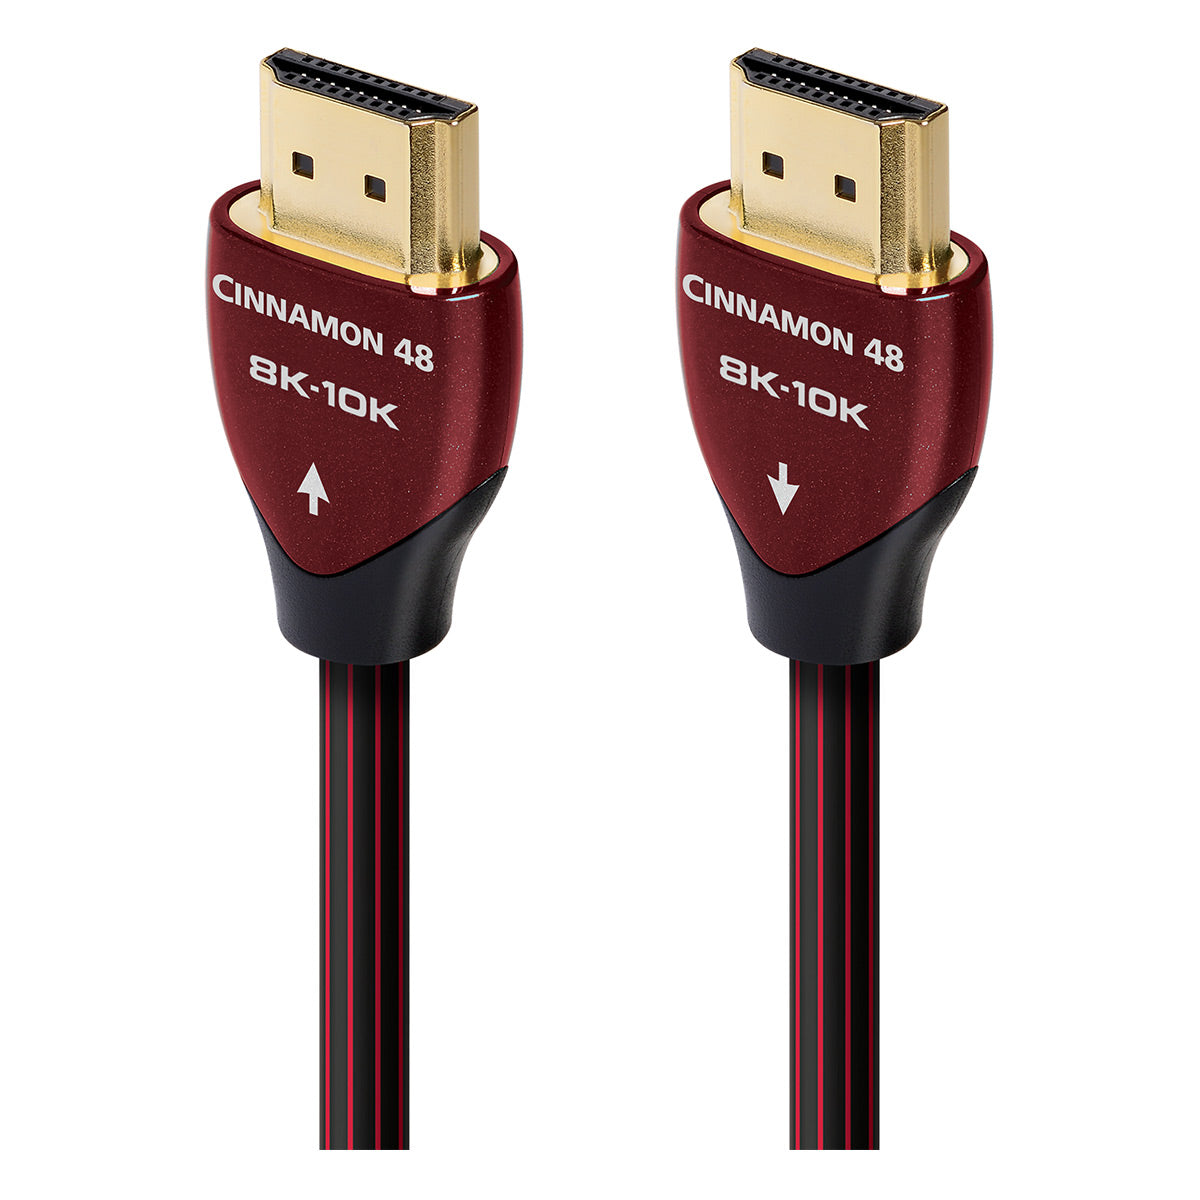 Photos - Cable (video, audio, USB) AudioQuest Cinnamon 48 8K-10K 48Gbps Ultra High Speed PVC HDMI Cable - 9.8 